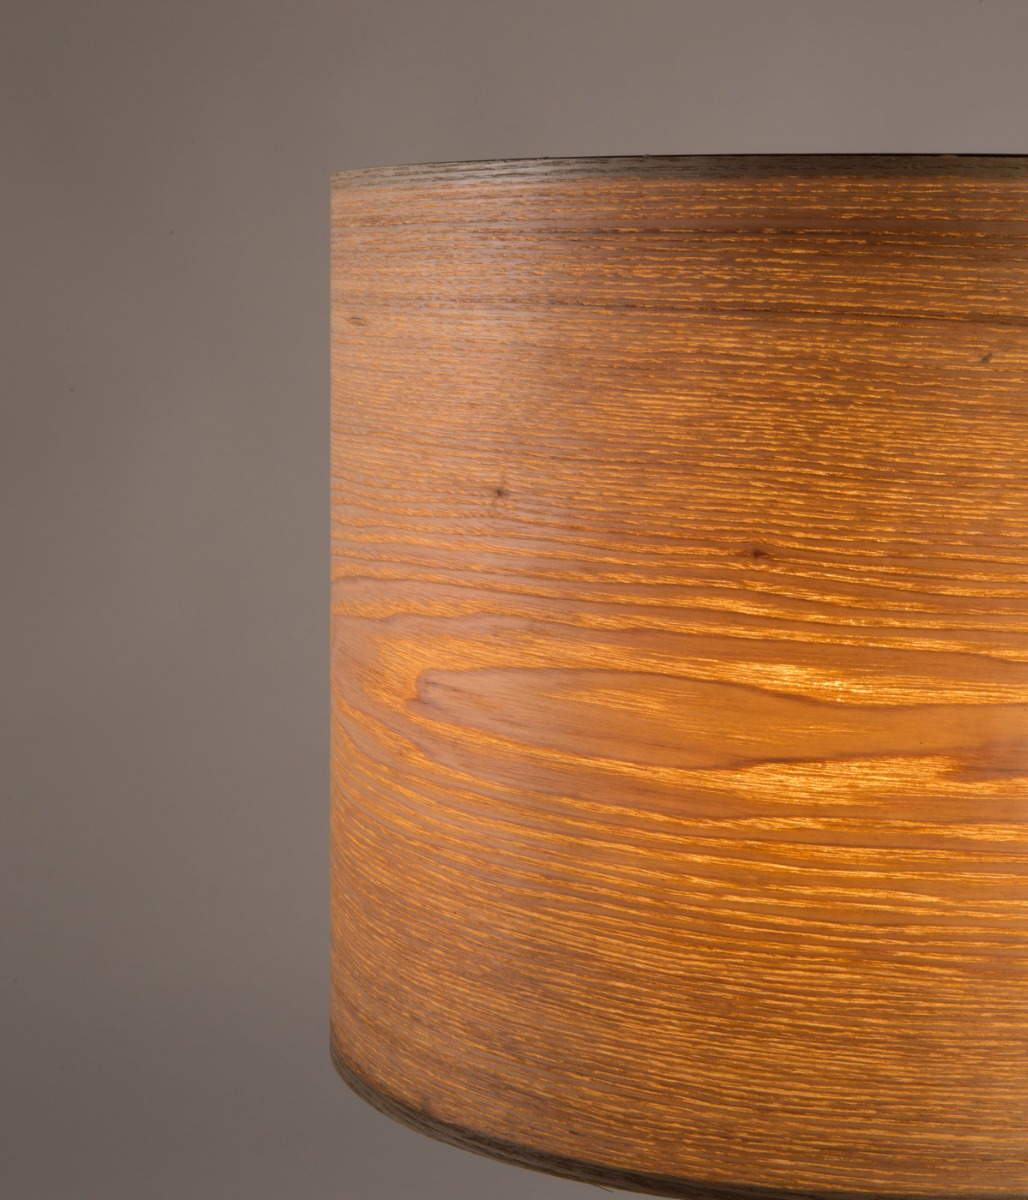 Woodland Table Lamp